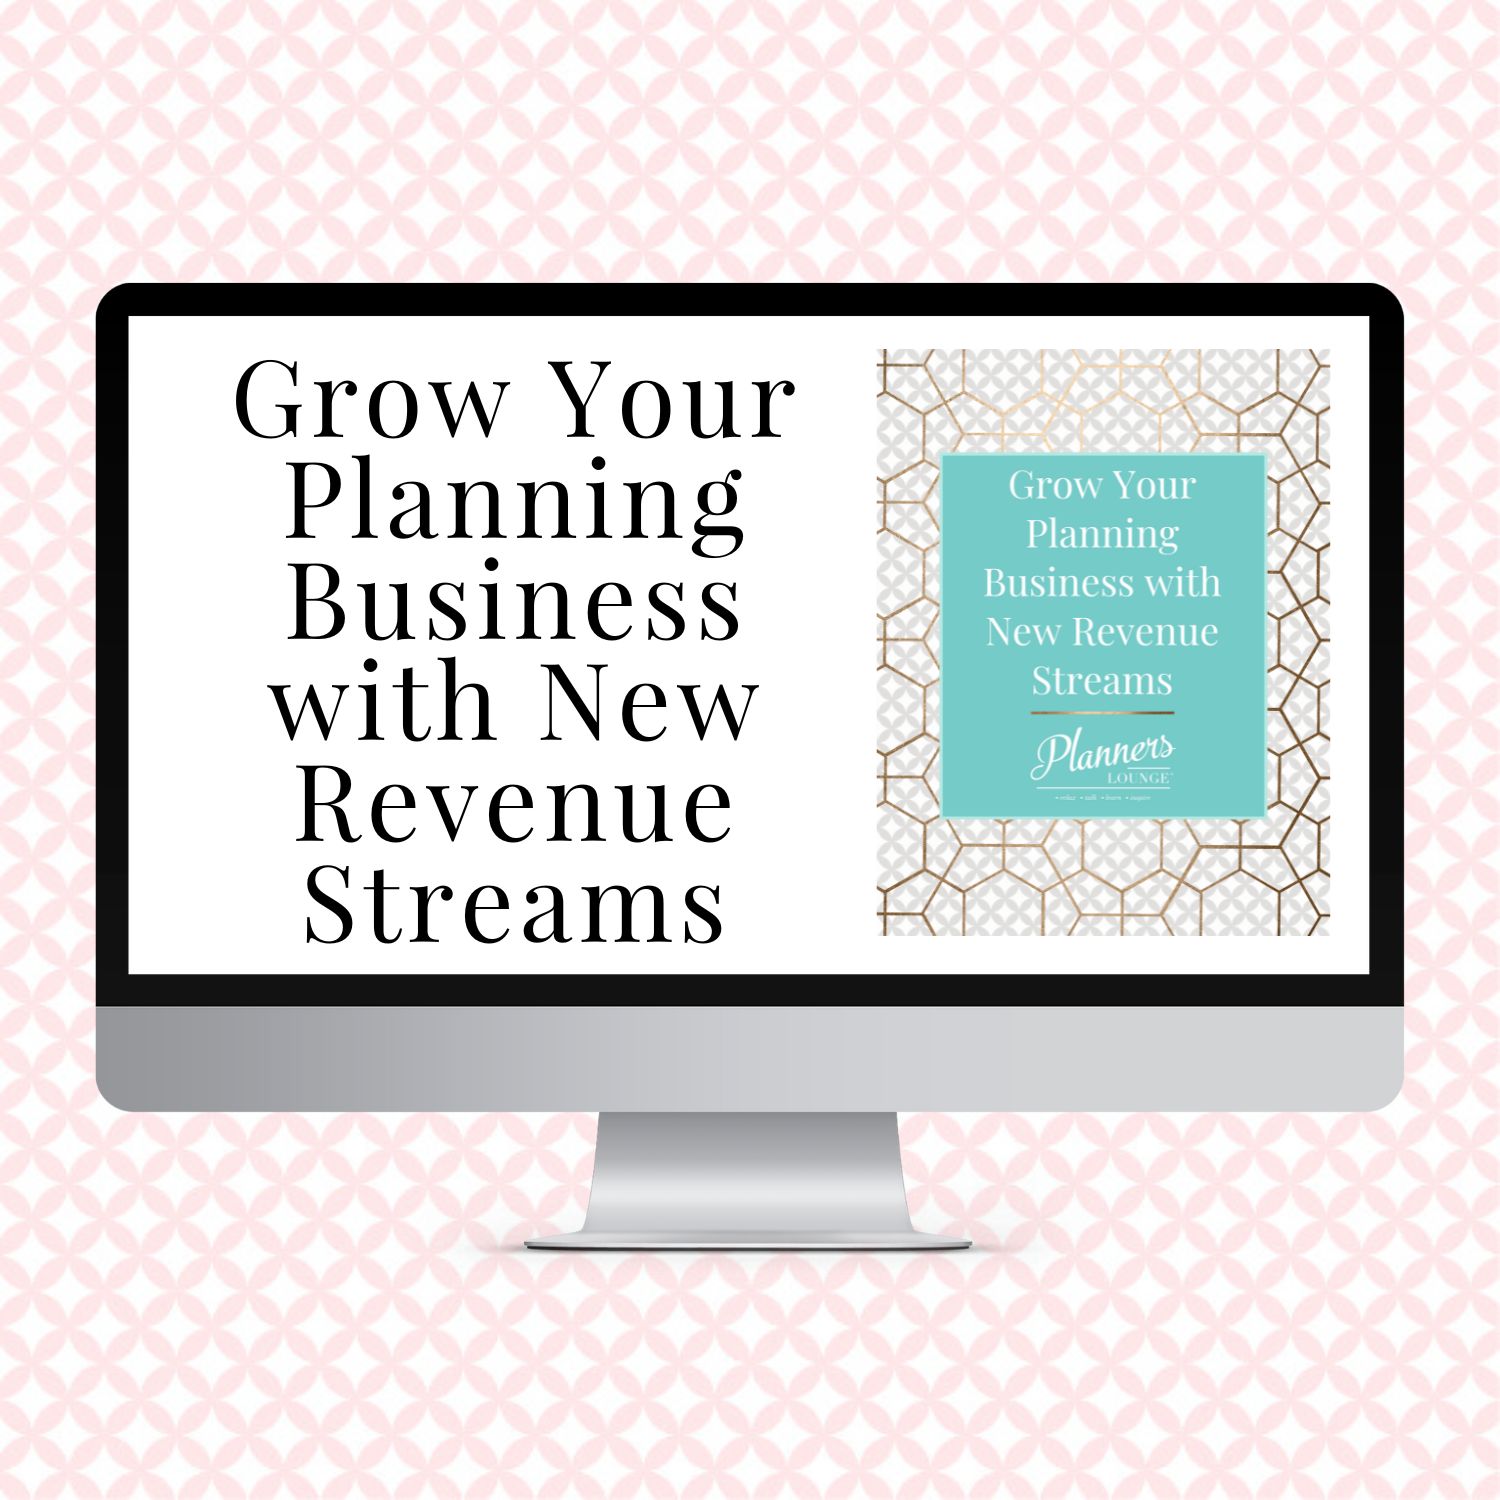 Grow Your Planning Business with New Revenue Streams